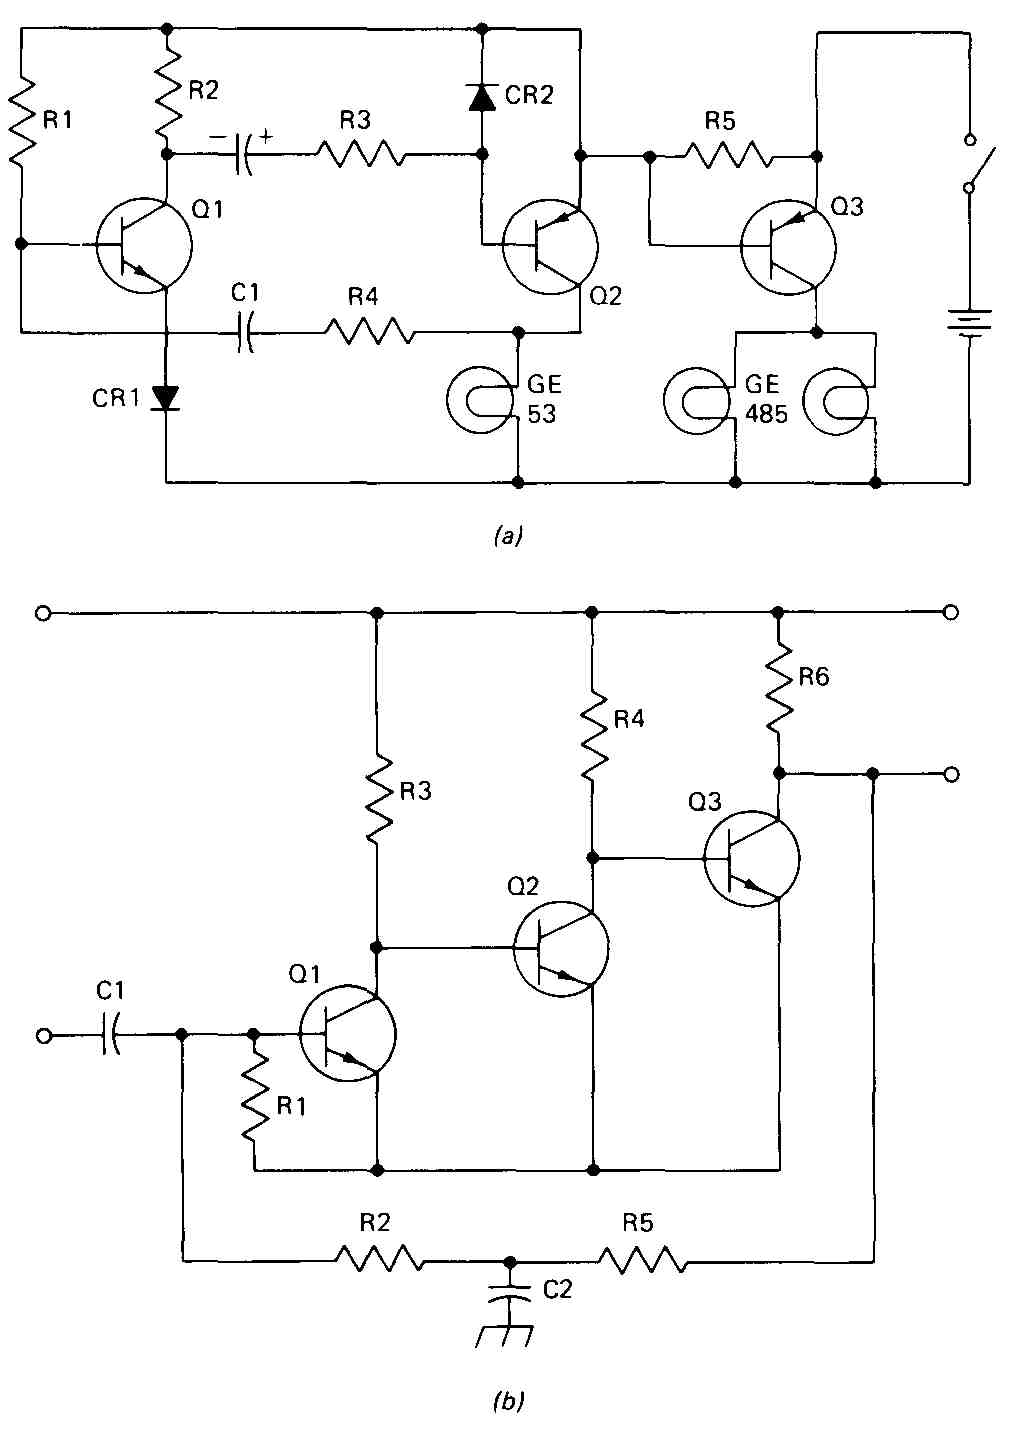 A Schematic Diagram Of An Electric Circuit 1